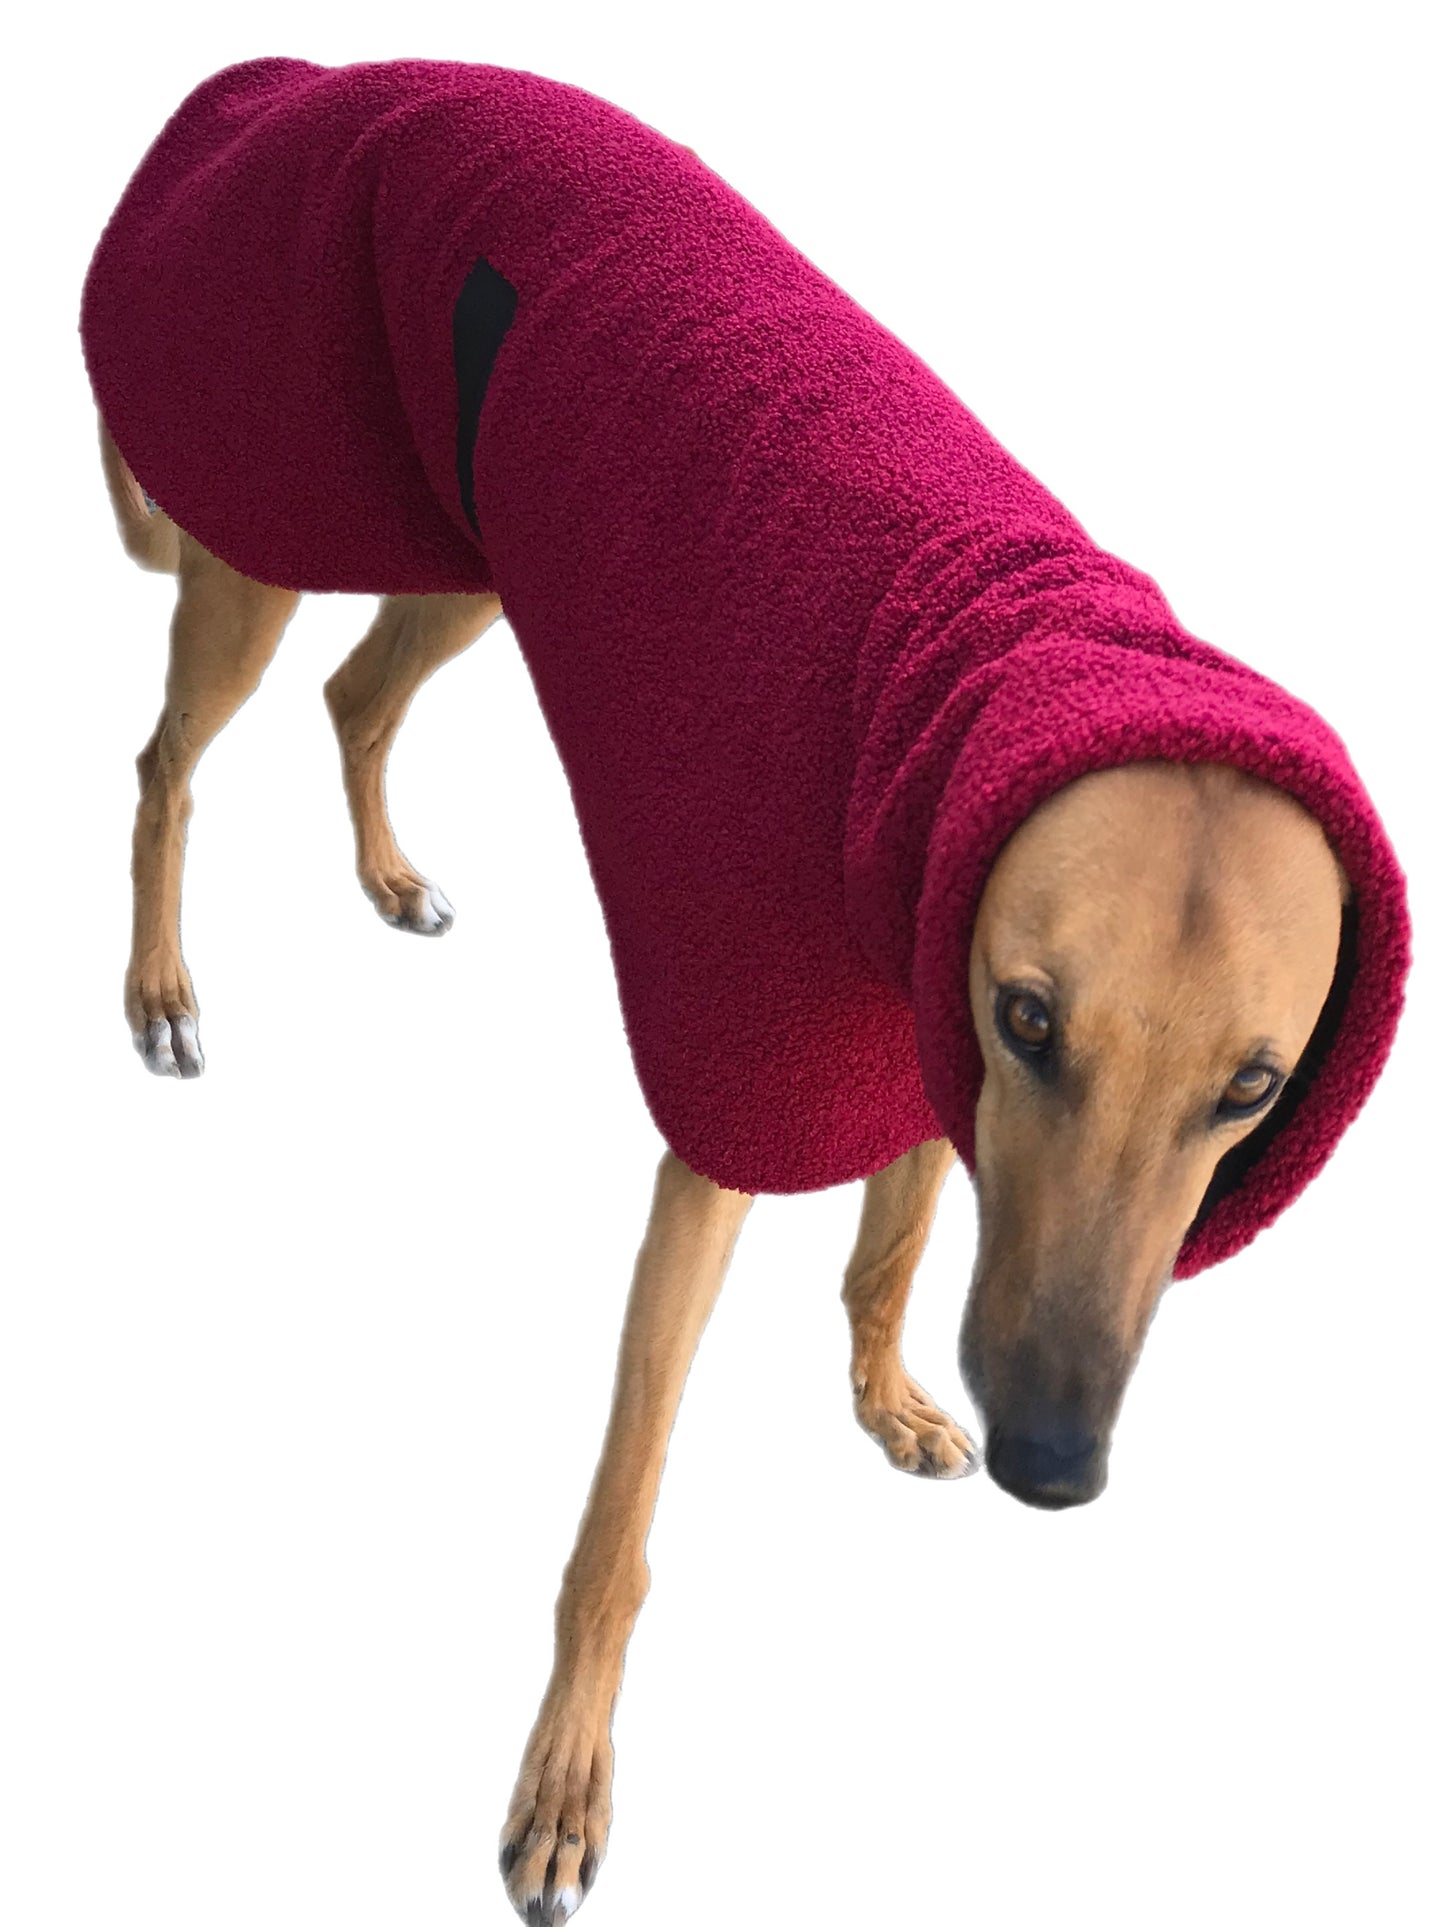 Beautiful burgundy Teddy fleece extra thick deluxe style greyhound coat with snuggly wide neck roll